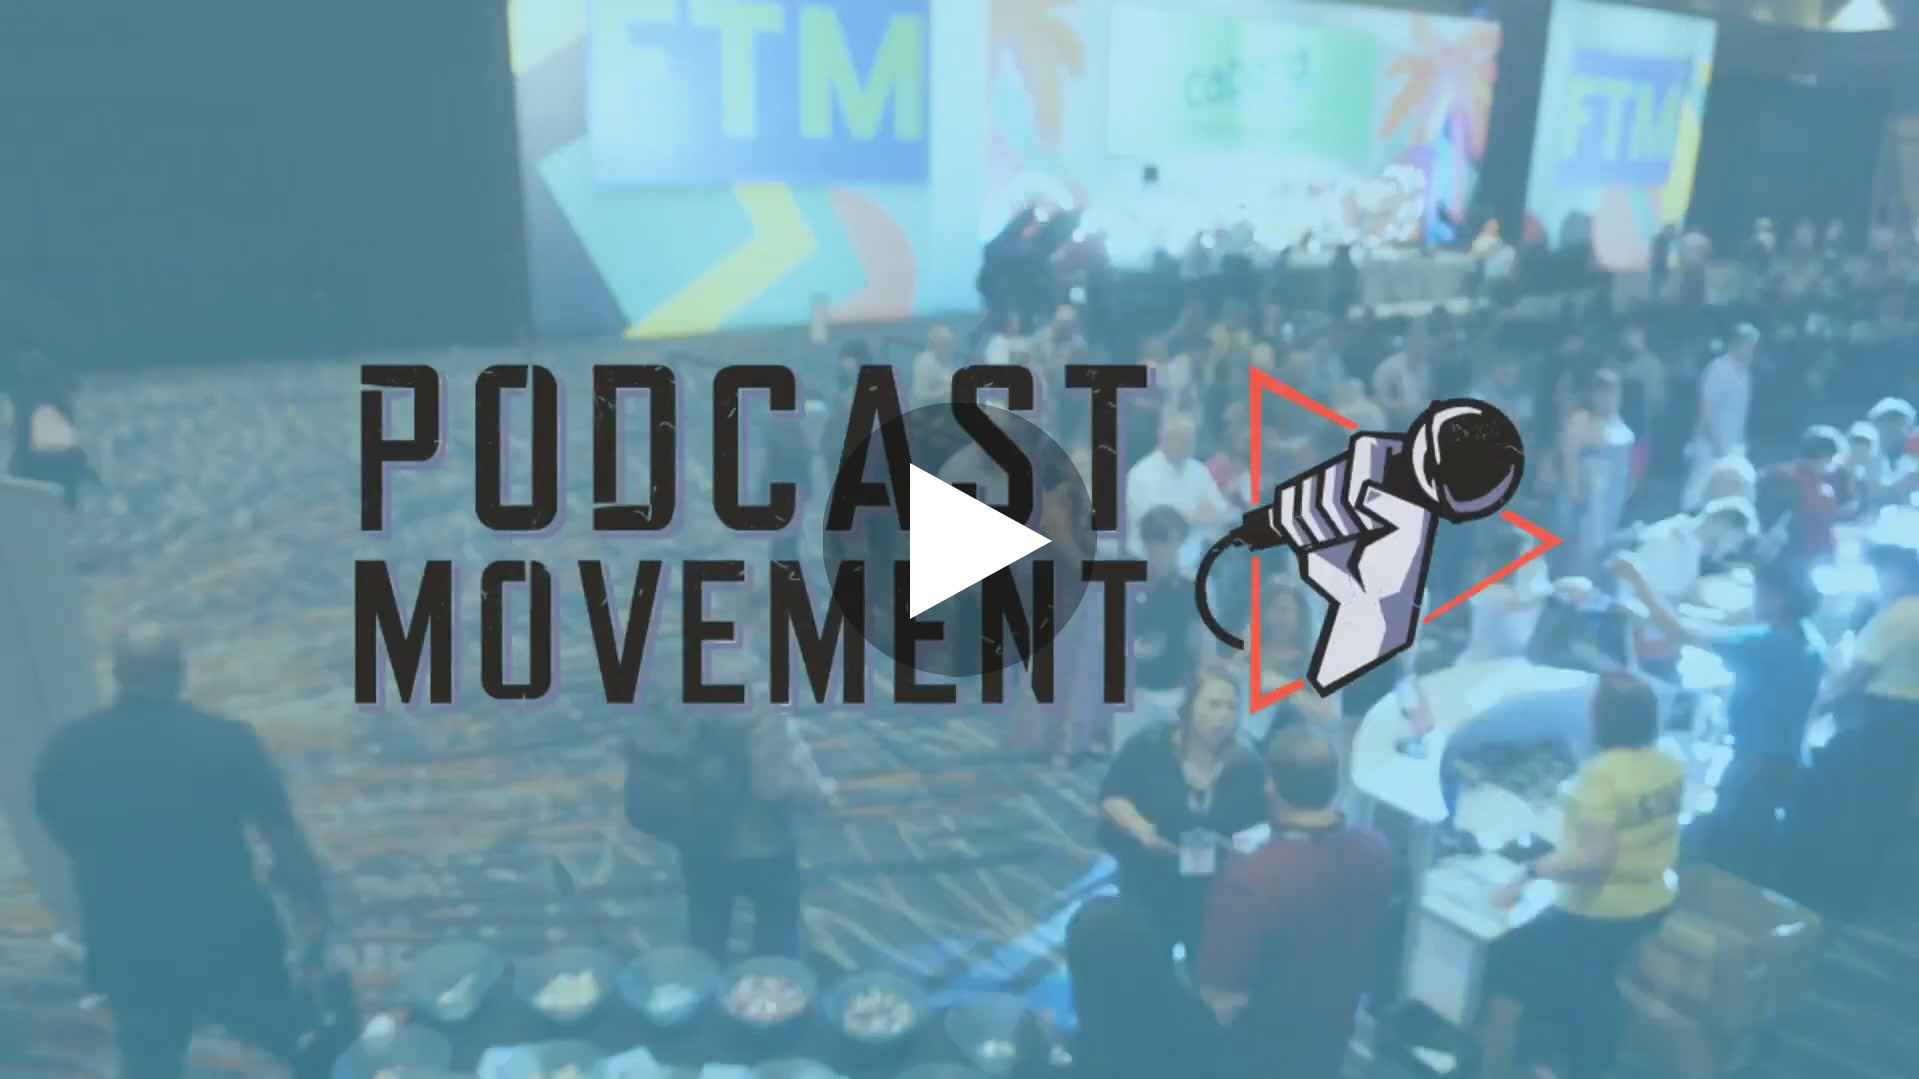 Podcast Movement 2019 Highlights